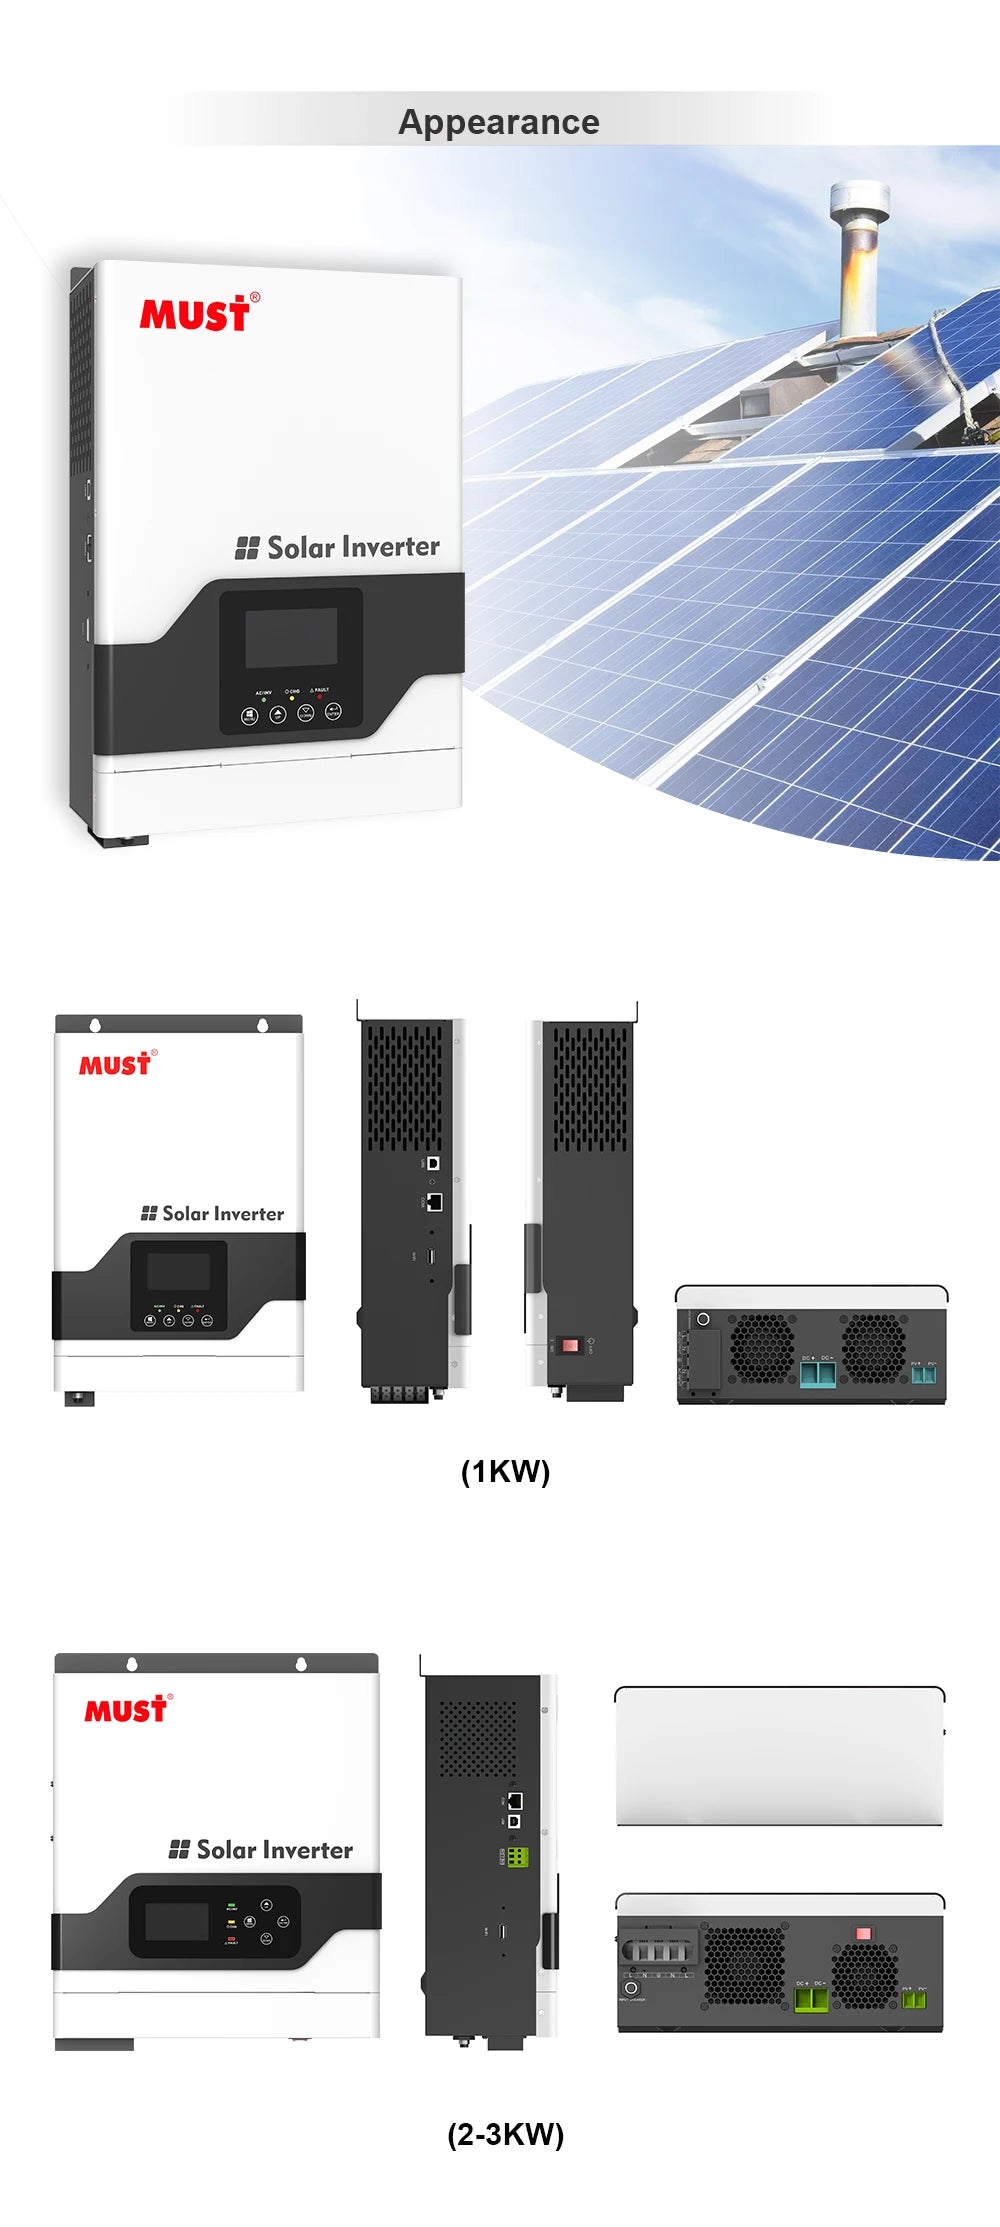 Solar Inverter with Built-in Charge Controller and WiFi Connectivity for Easy Monitoring.